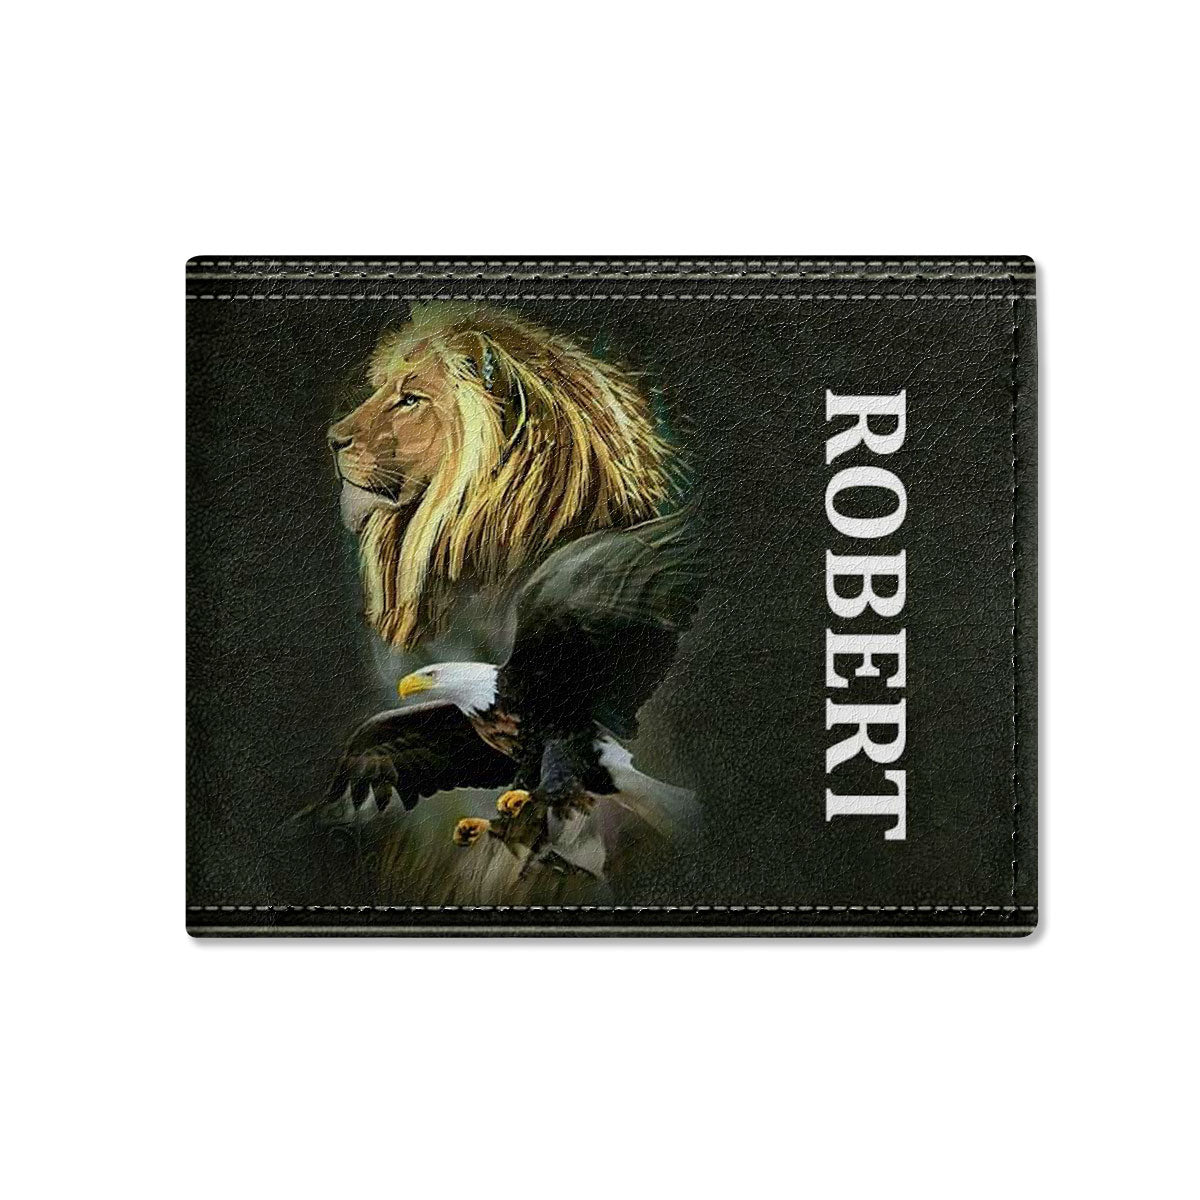 Not Ashamed Of The Gospel - Personalized Leather Folded Wallet SBLFWM1031